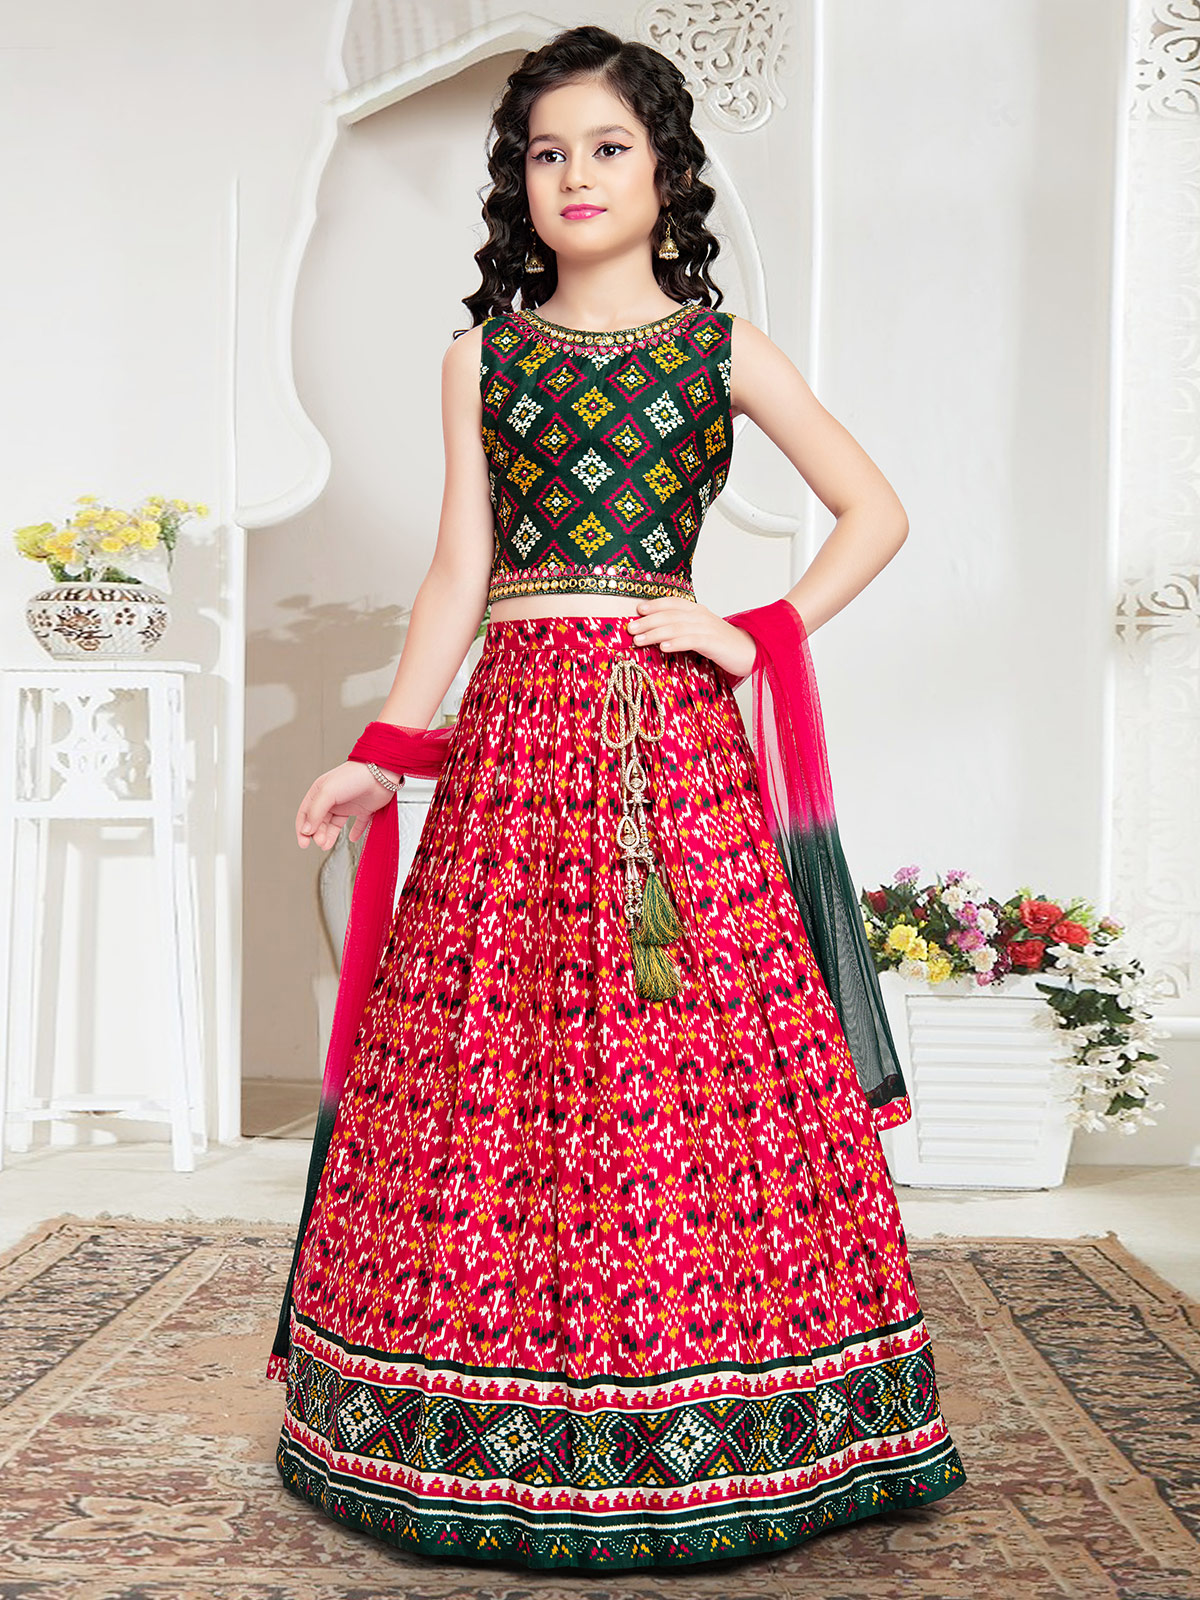 Pin on Indian fashion dresses